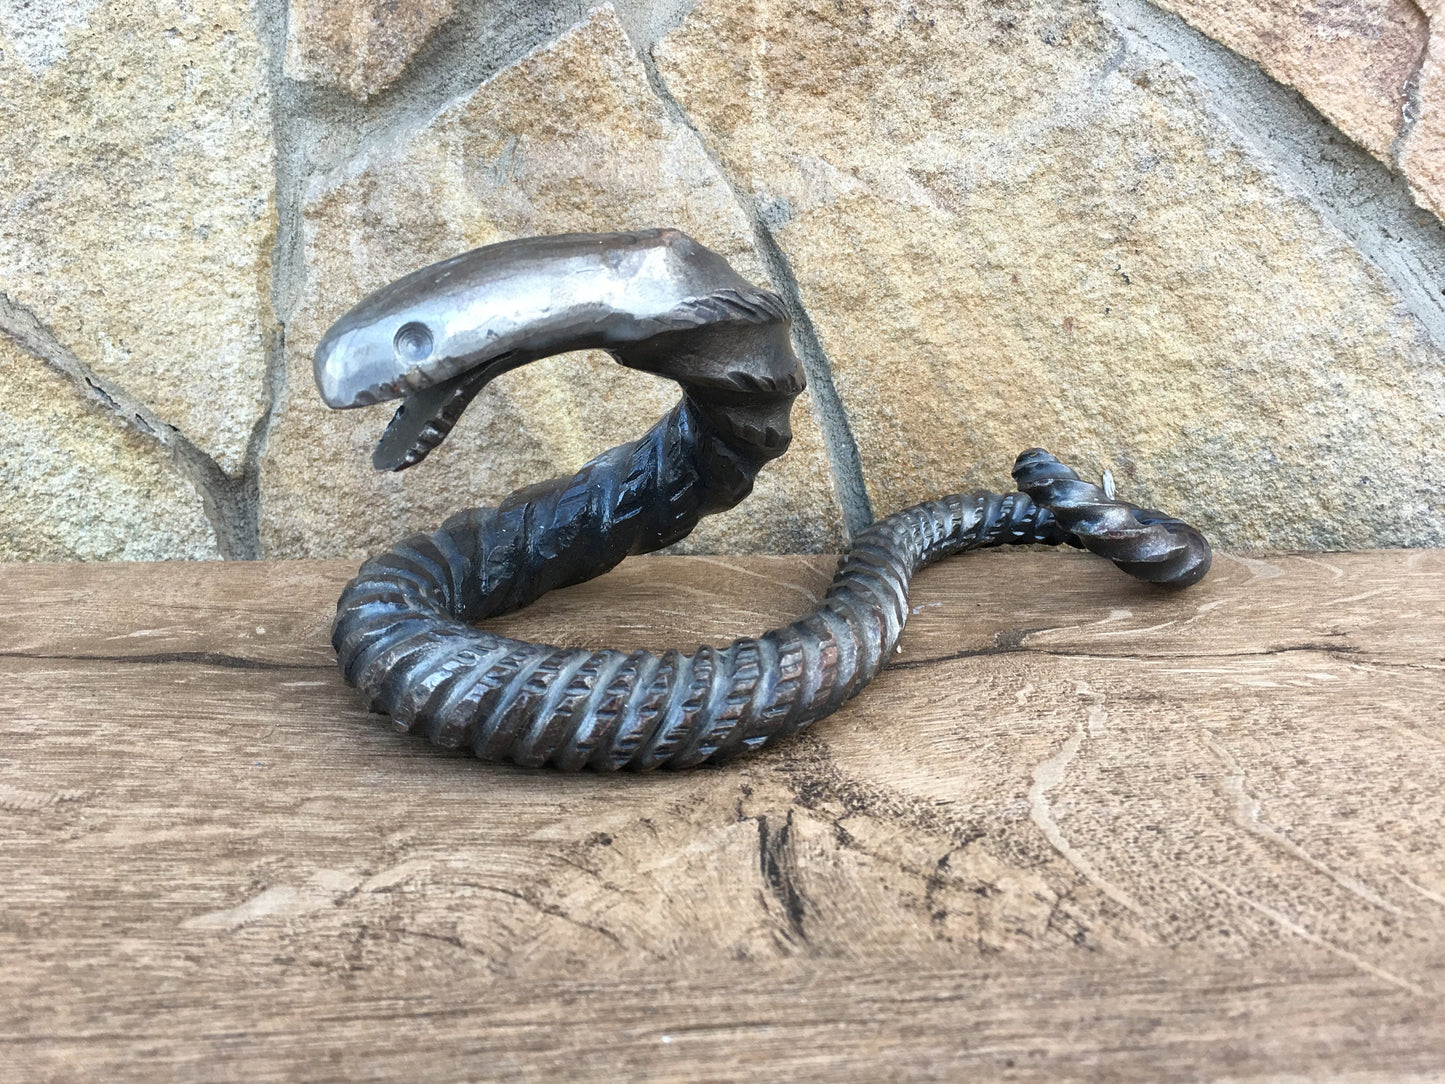 Iron snake, hand forged snake, metal snake, steel snake, home decor ideas, home decor gifts, cool gifts, wooden gifts, glass gifts, snake